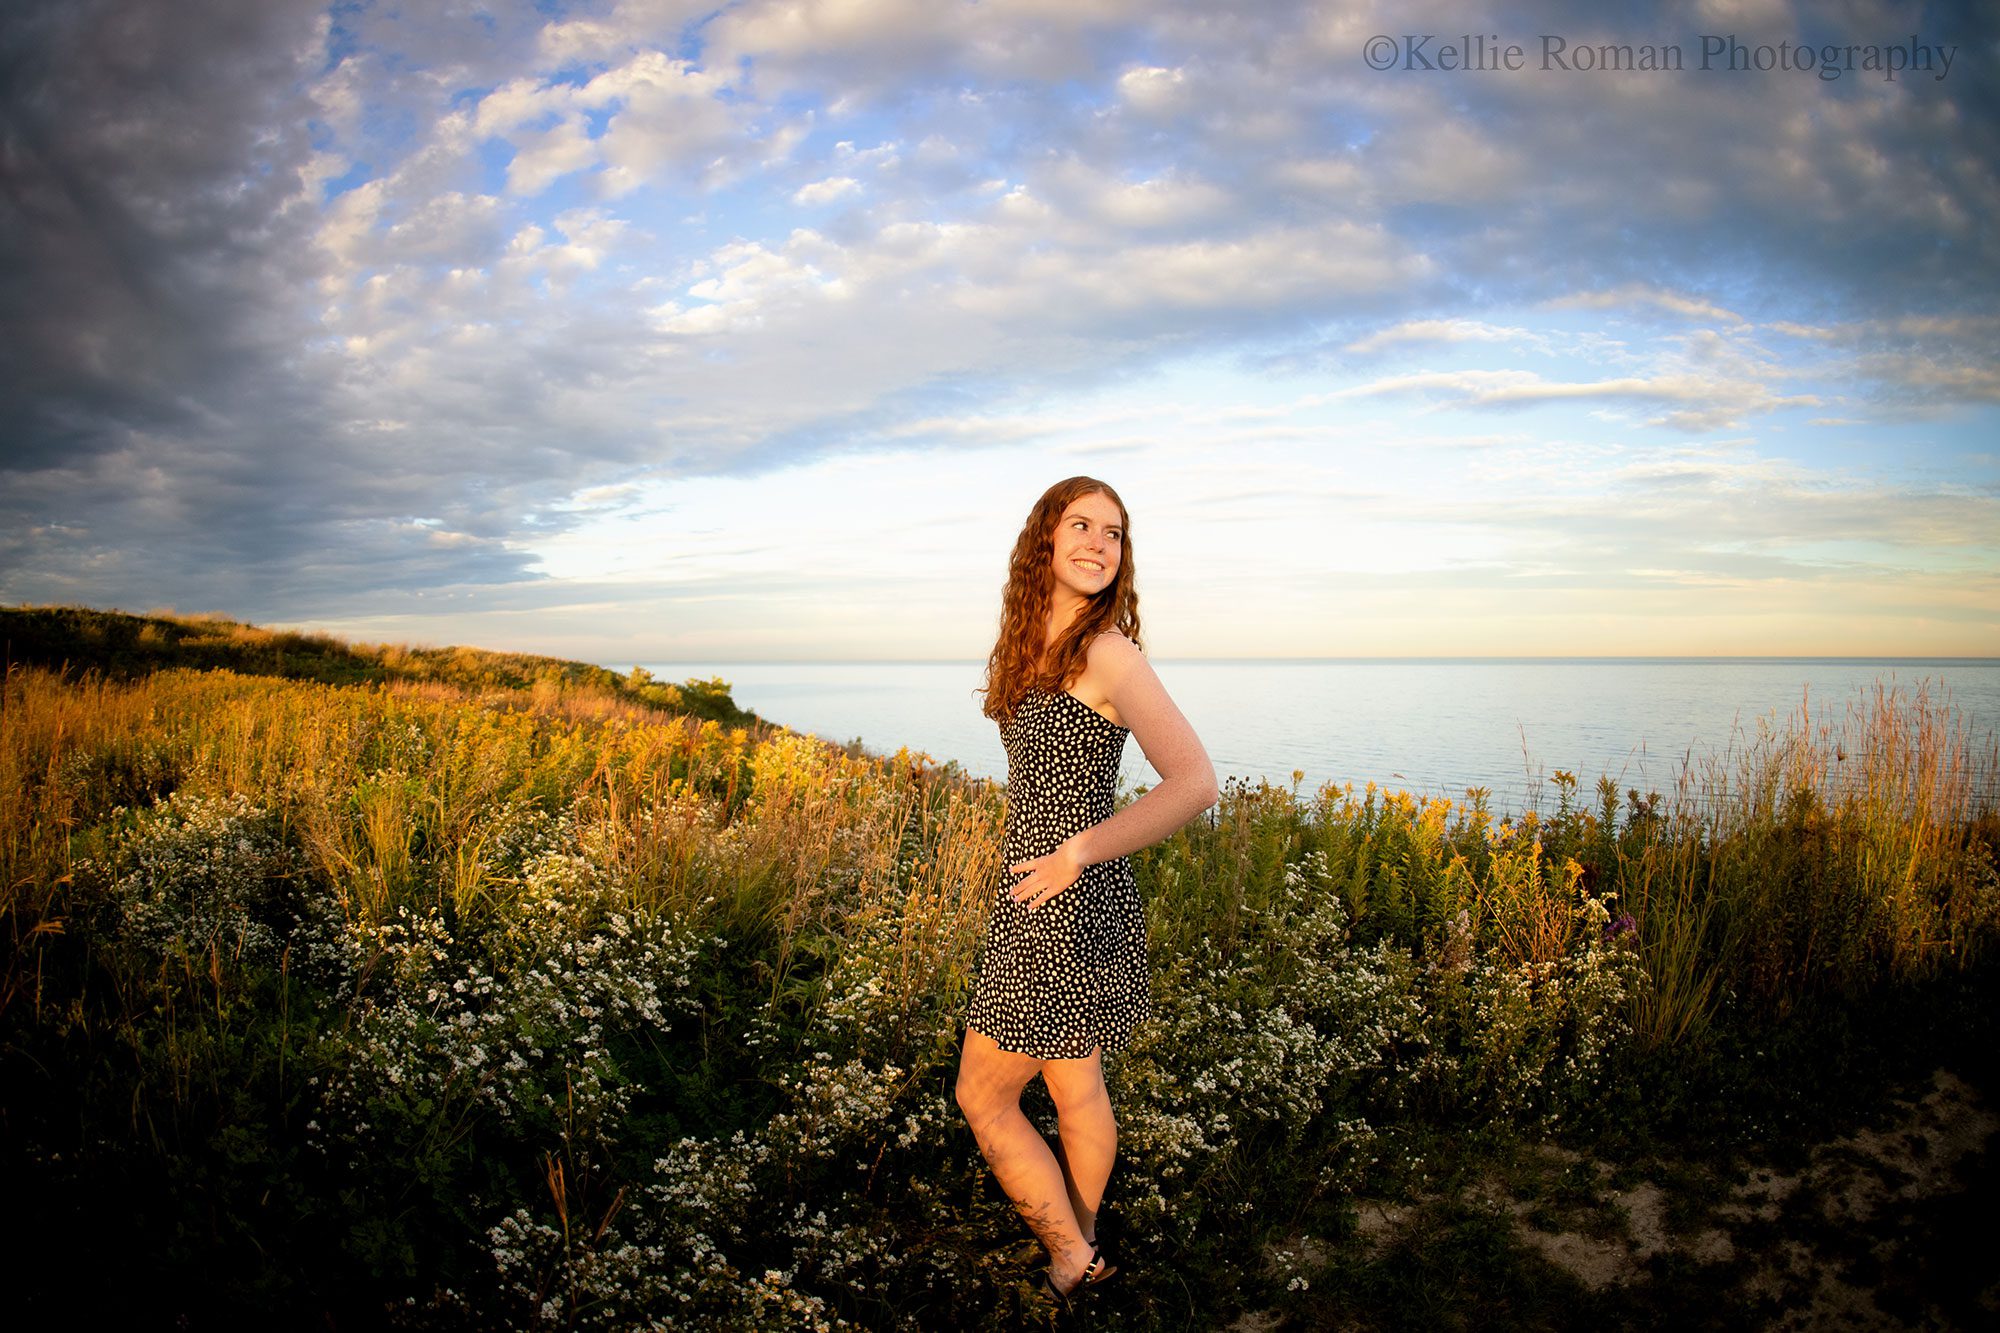 senior photography milwaukee. high school senior girl stand with her hand on her hip and is looking behind her. Lake Michigan and lots of tall grass is behind her. girl has red curly hair and a dress with white polka dots.